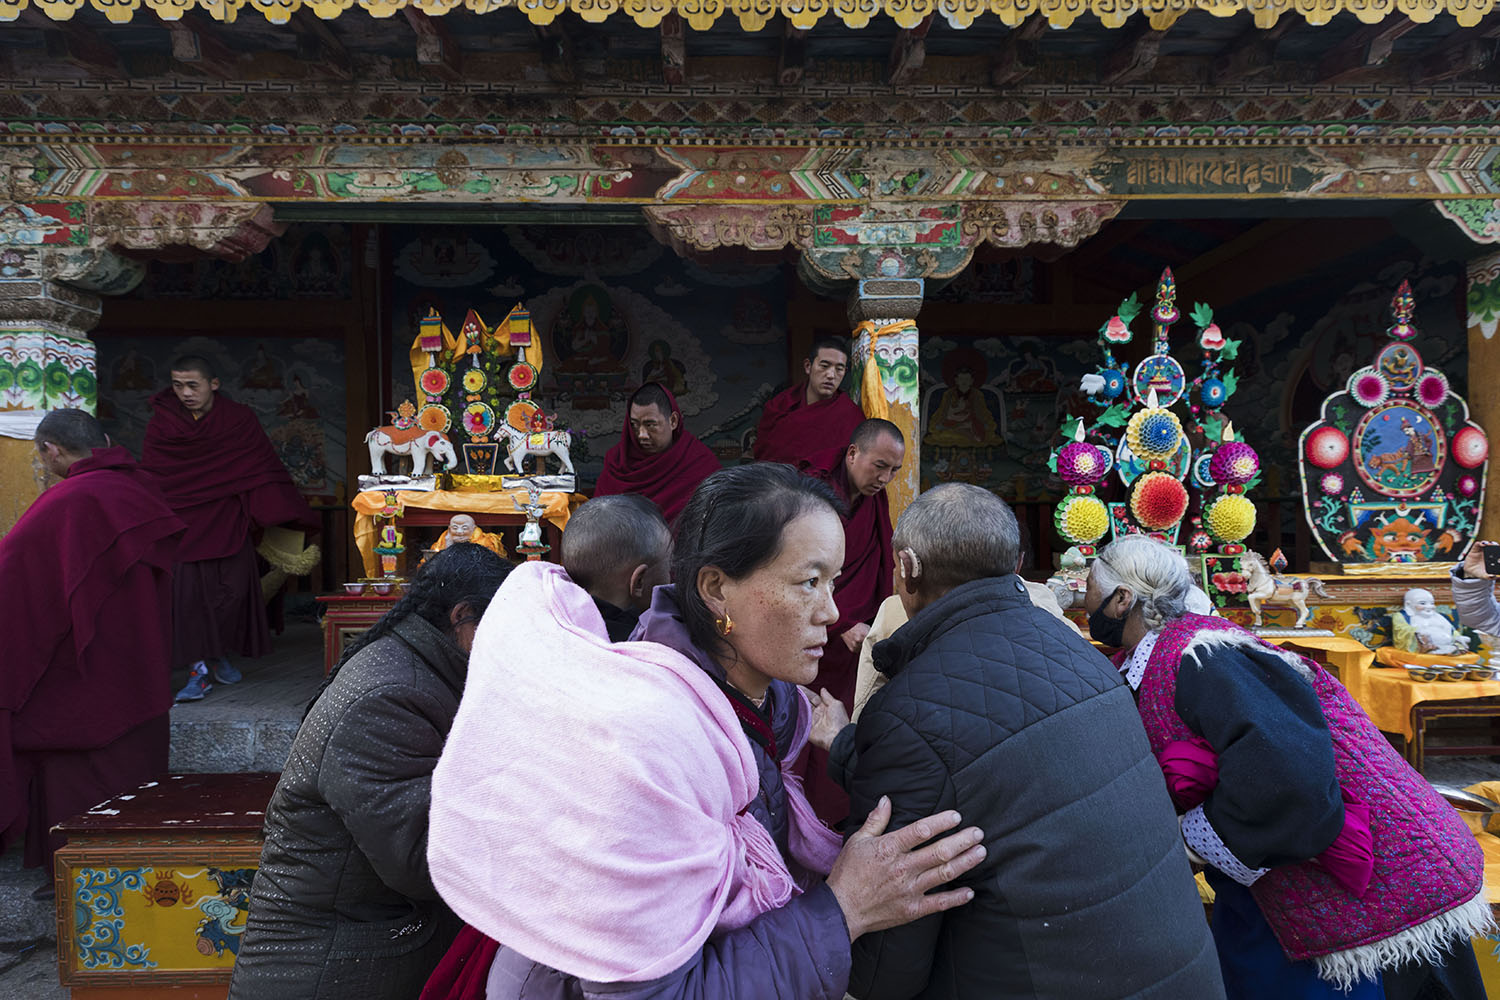 Devotees make offerings of prayer in return for holy water at SongZangLin Monastery in JingXiang Village. Yunnan, China. March 2, 2018.